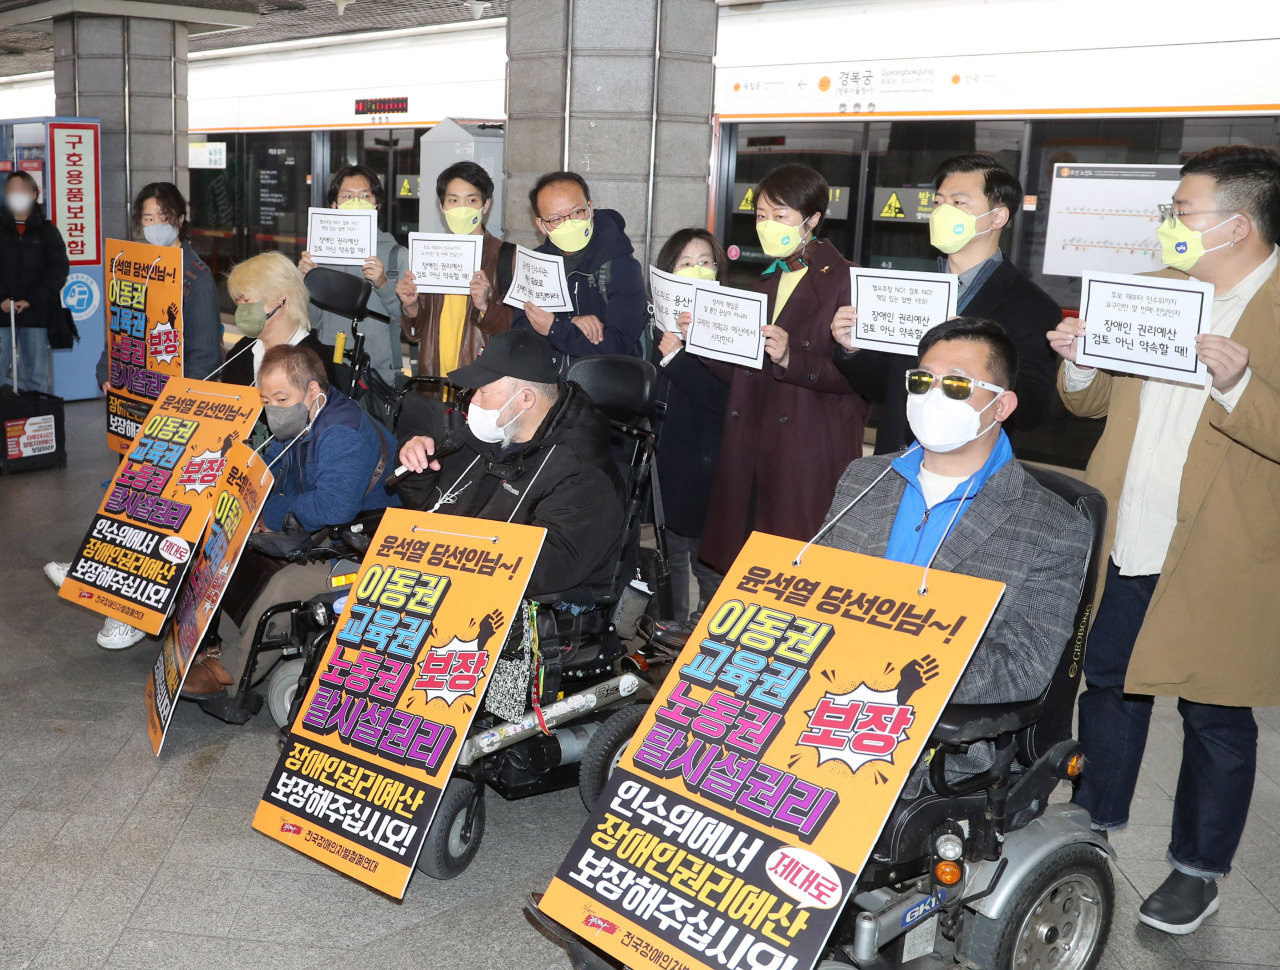 Members of the with the Solidarity Against Disability Discrimination hold a press conference at the platform of Gyeongbokgung Station in Seoul on Tuesday. (Yonhap)